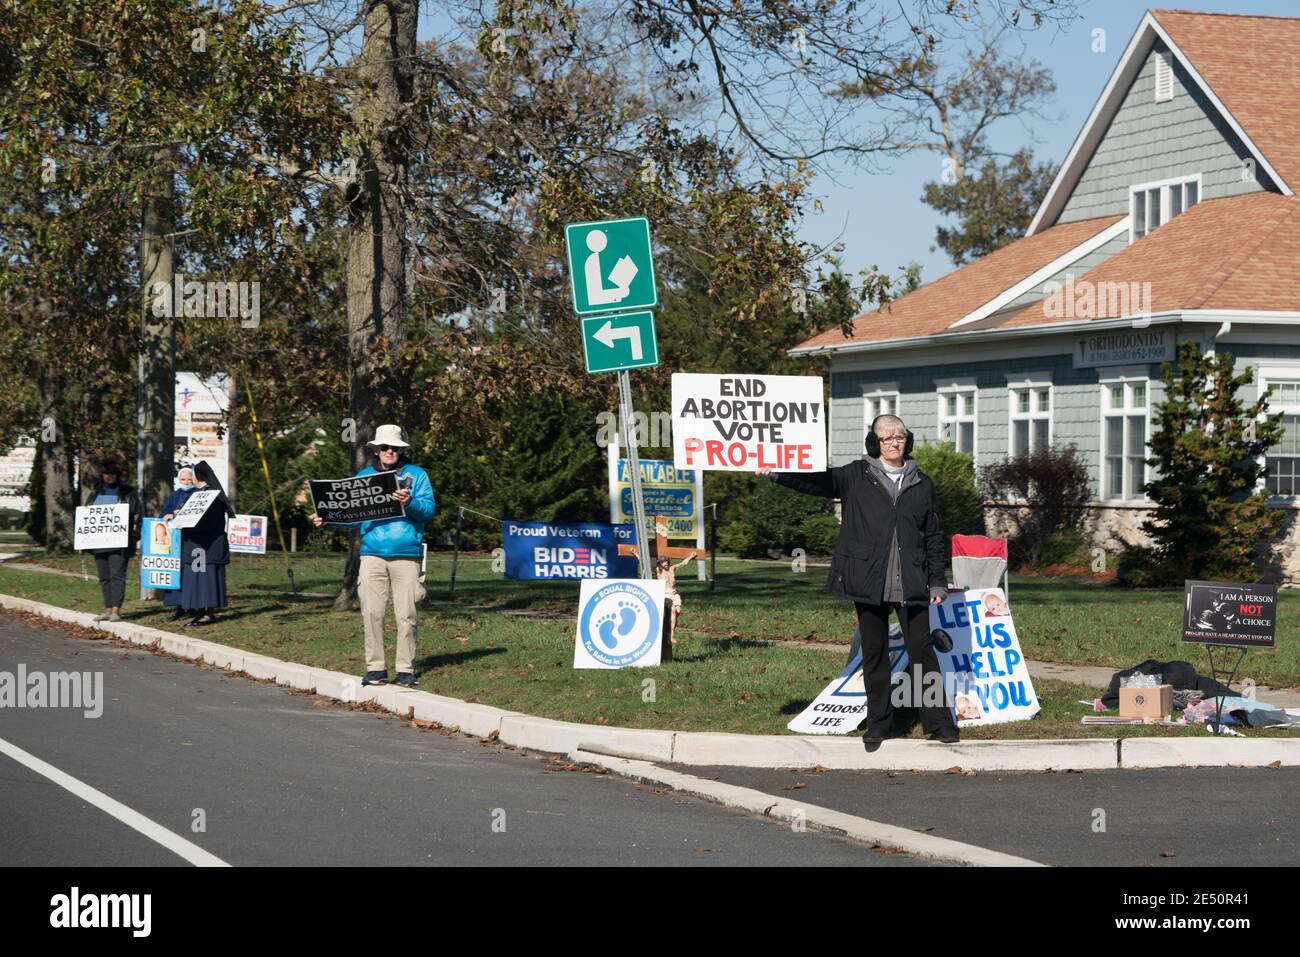 Galloway, NJ - Oct. 31, 2020: Woman holding an "End Abortion! Vote Pro-Life" sign is part of an anti-abortion protest group. Stock Photo